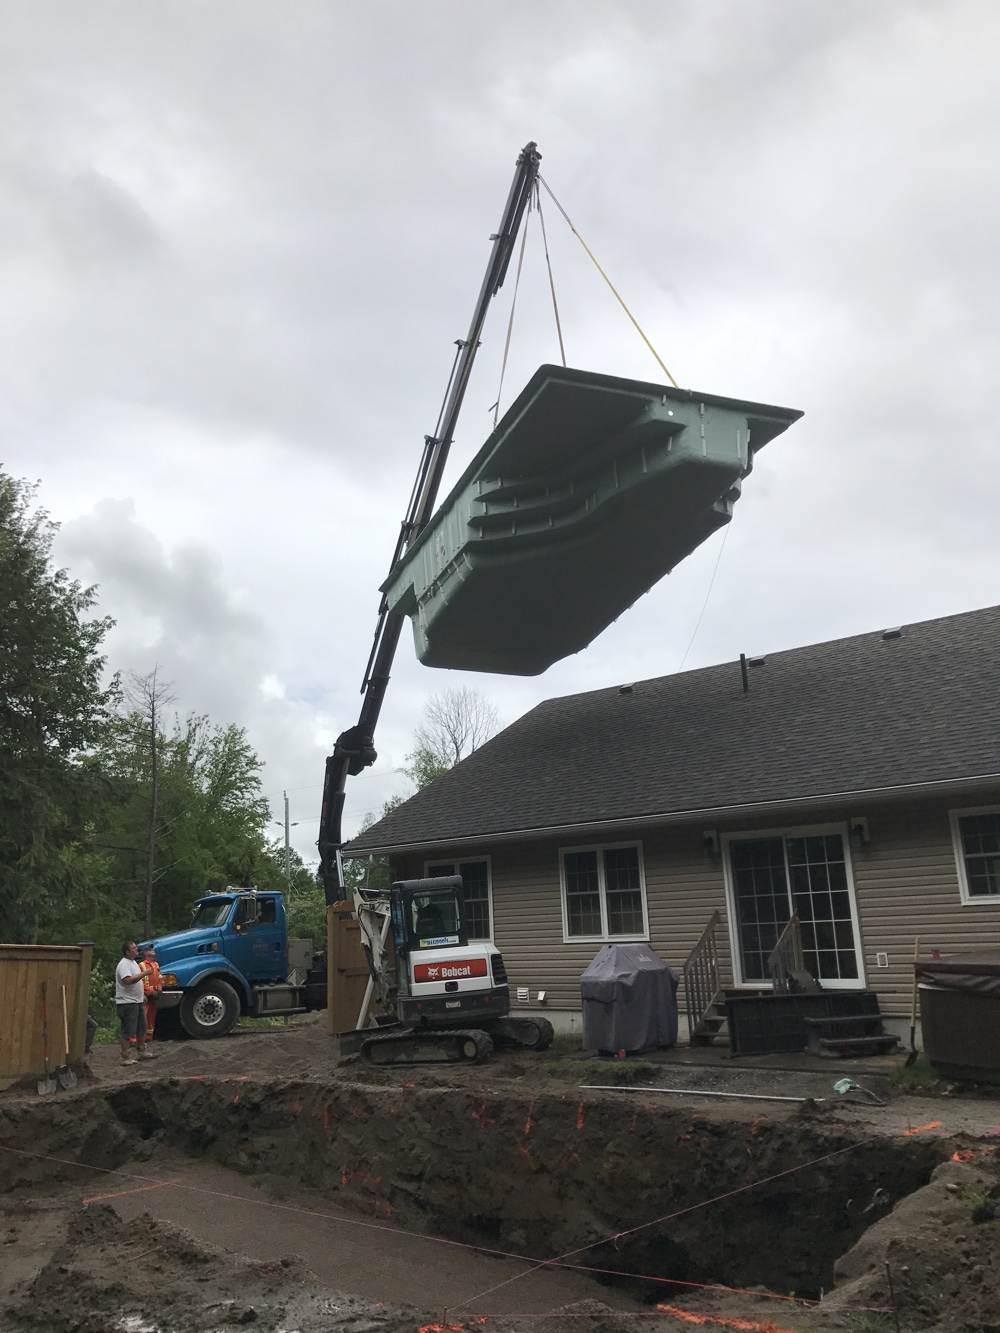 Crane lifting a fiberglass pool over a house in Barrie, Ontario